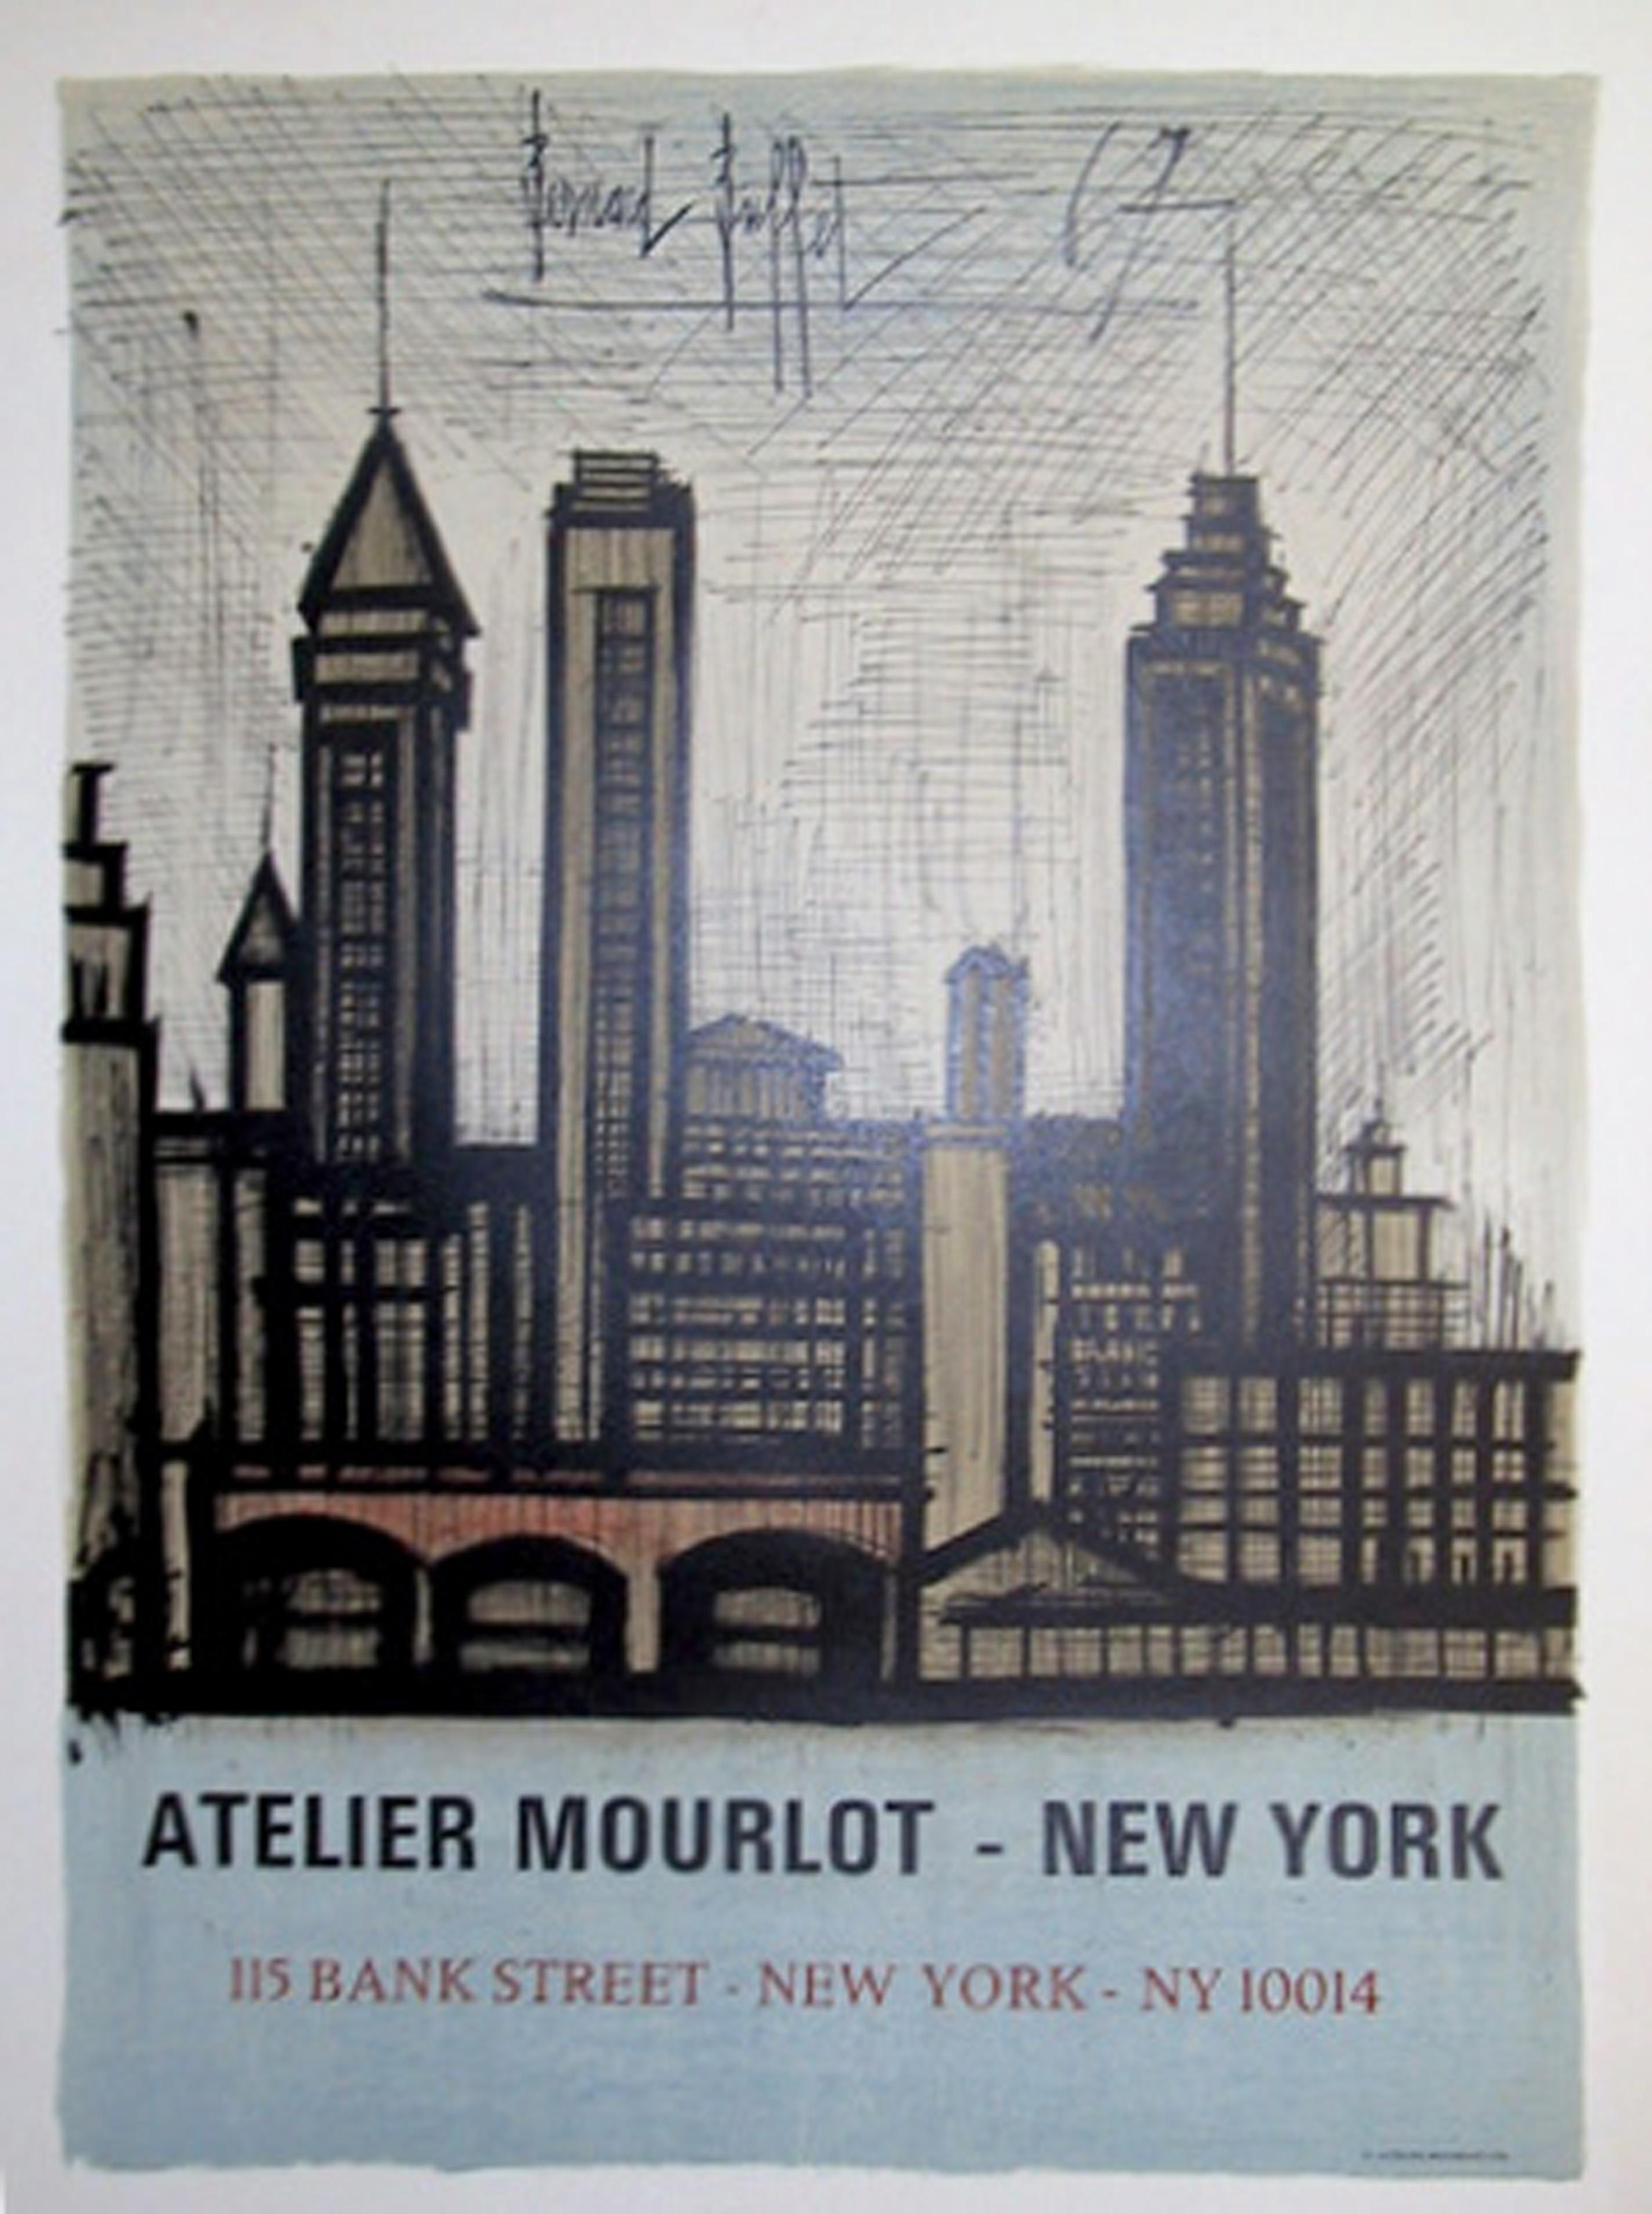 Bernard Buffet, French (1928 - 1999) -  Atelier Mourlot - New York. Year: 1967, Medium: Lithograph Poster, Size: 30 in. x 23 in. (76.2 cm x 58.42 cm) 